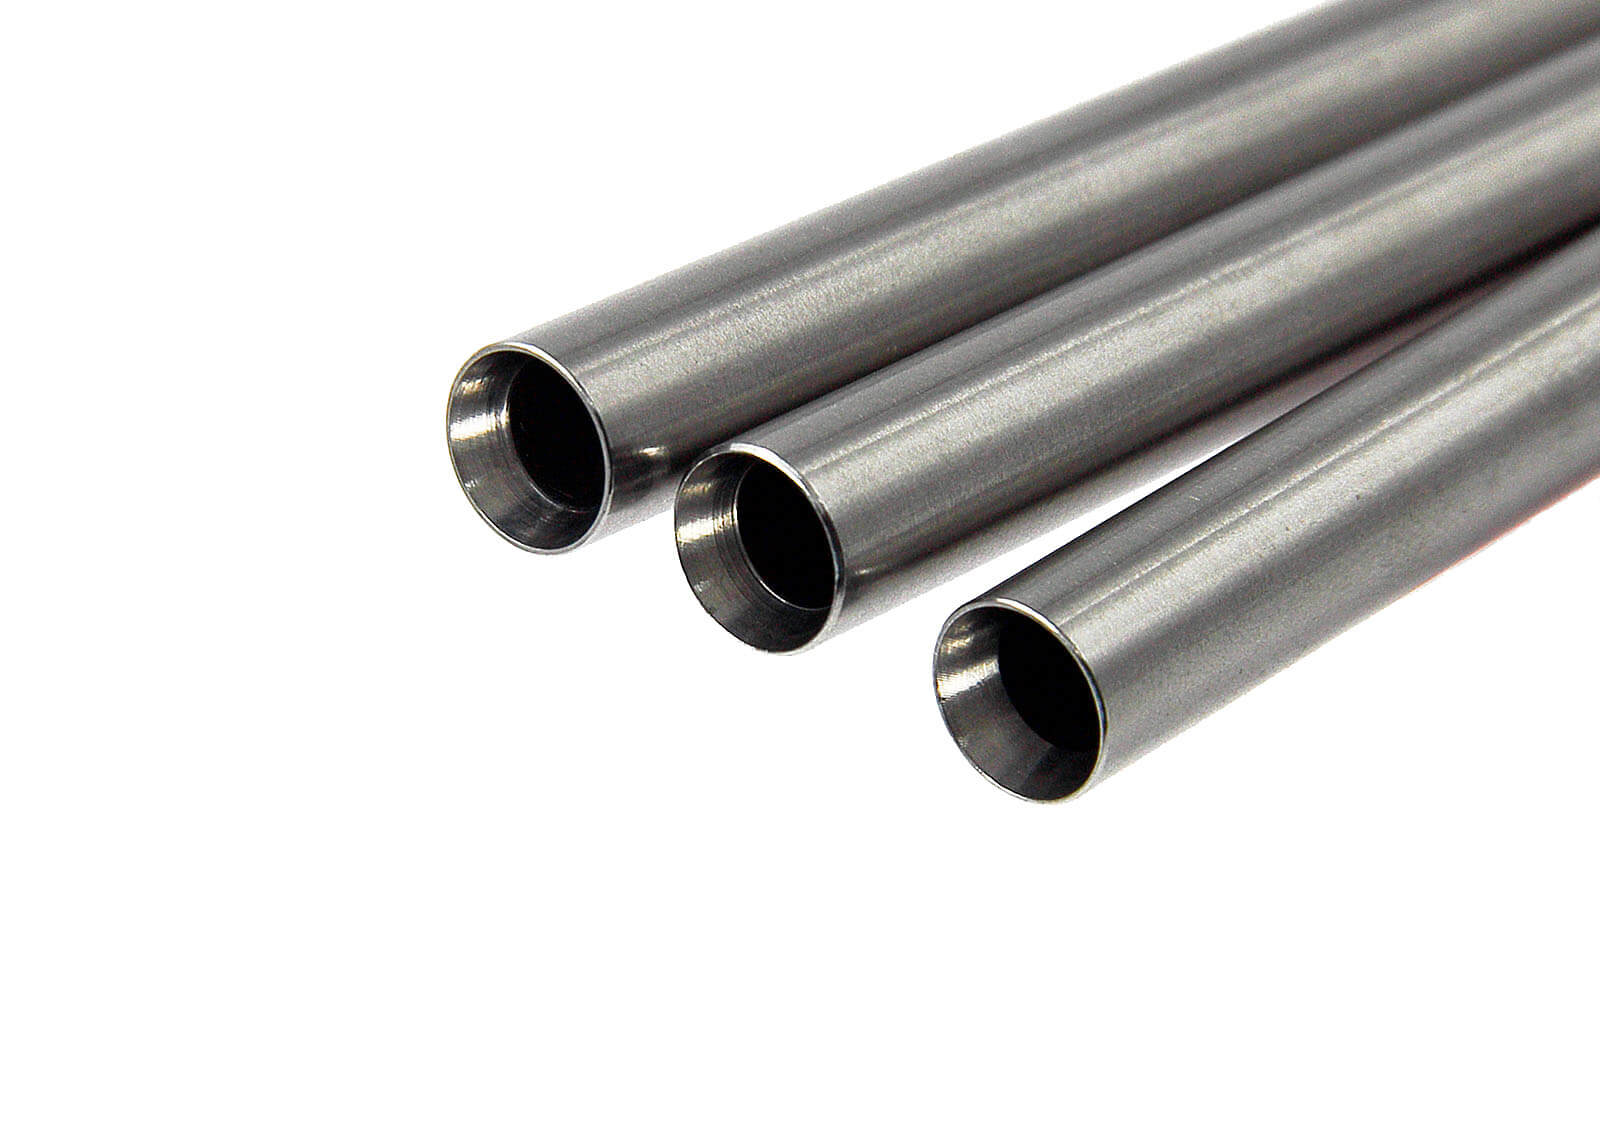 Stainless Steel 6.03mm Precision GBB Inner Barrel 146mm - Modify Airsoft Parts